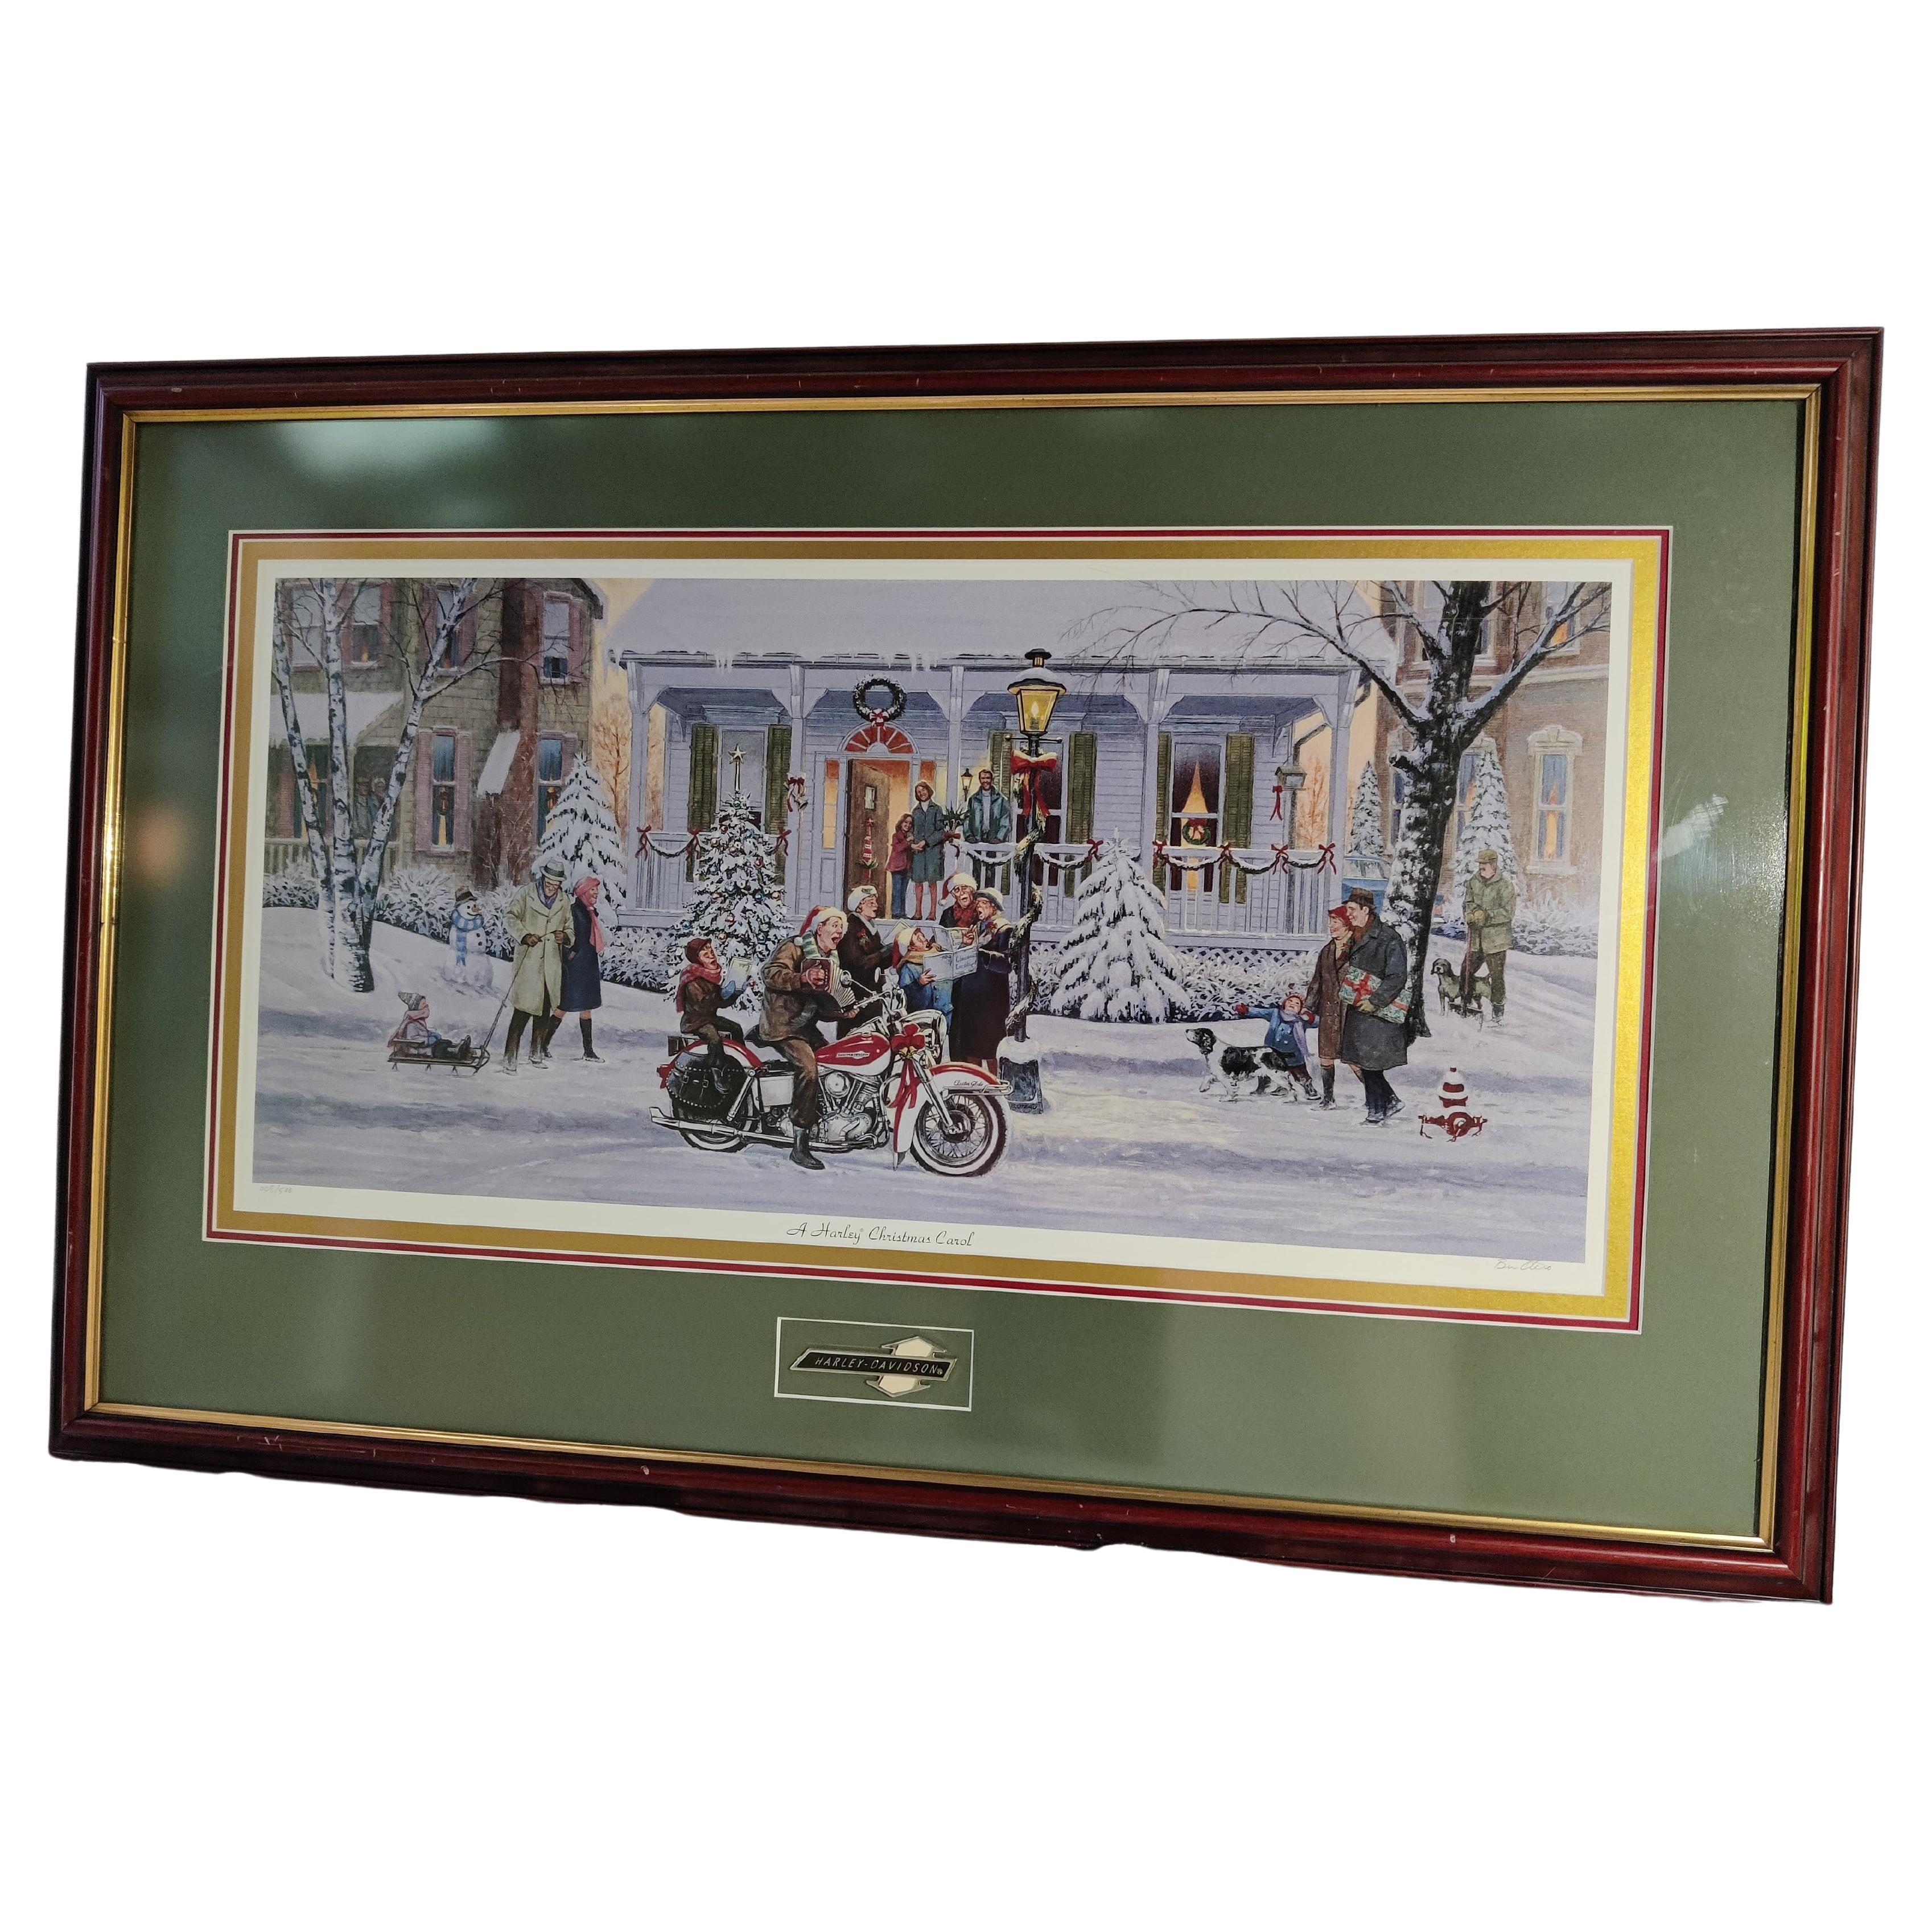 Harley Davidson Christmas print by artist Ben Otero signed and numbered 008/500 For Sale